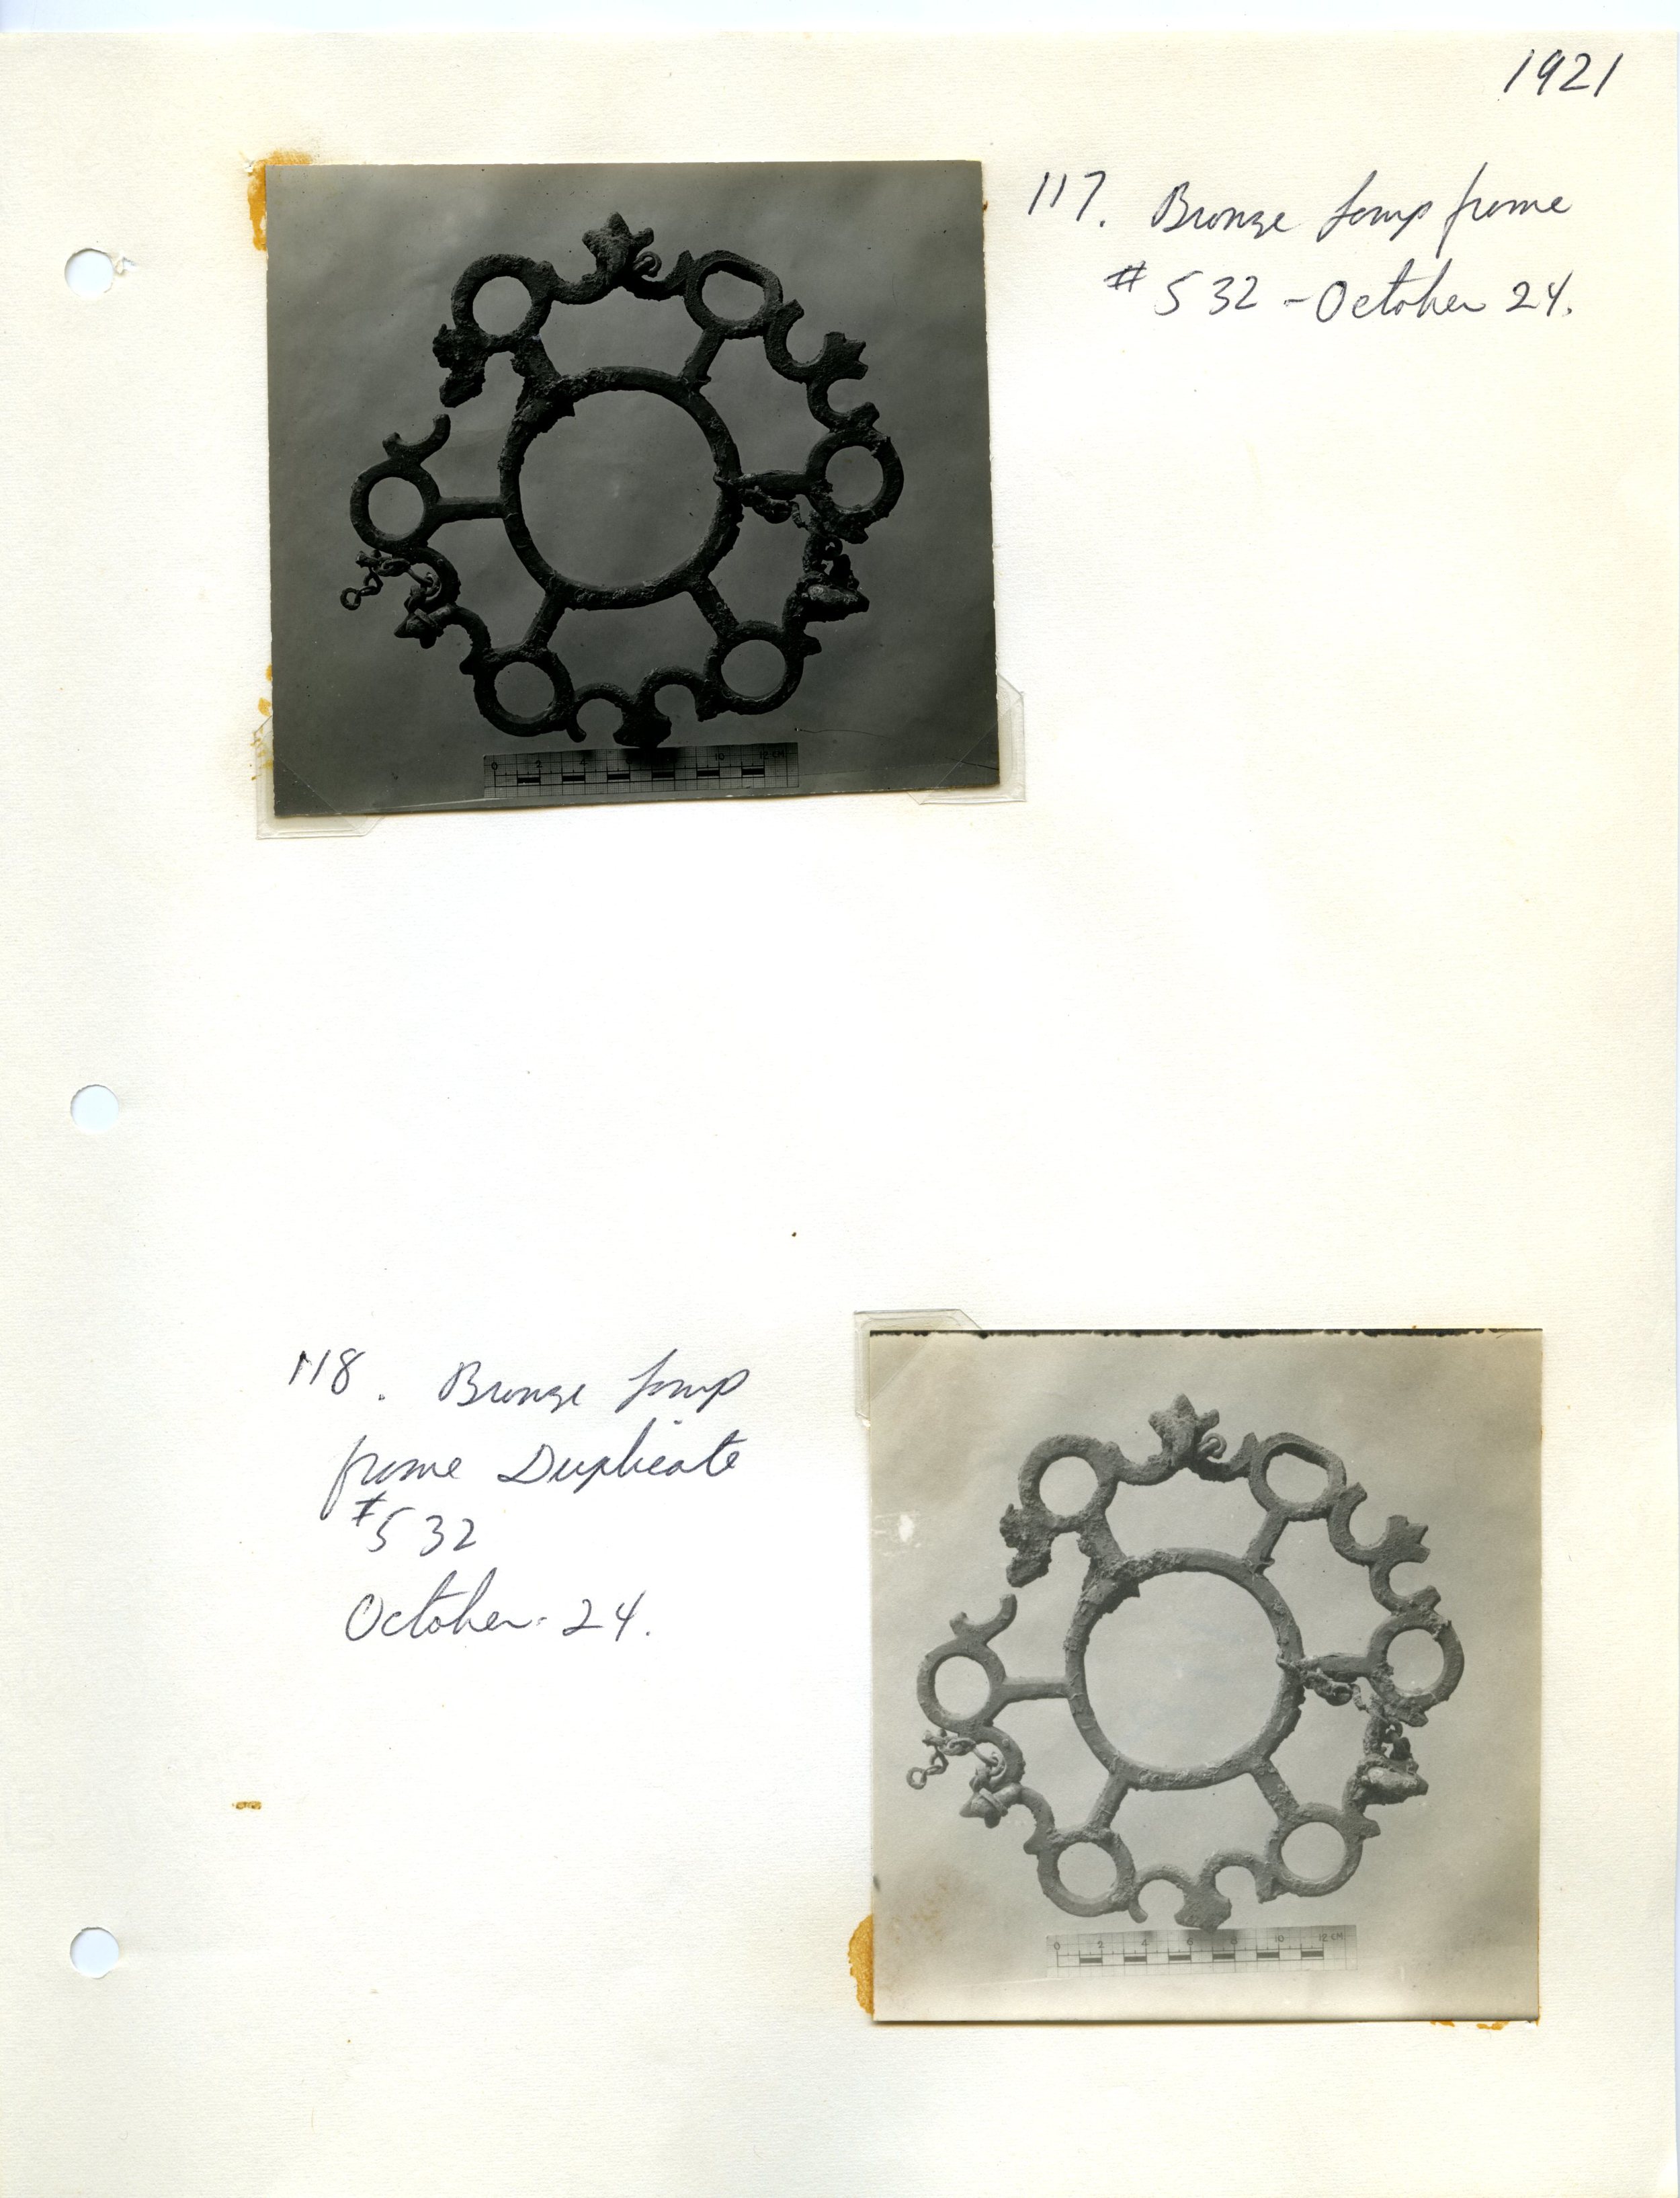 Excavation Notes and Photographs of Two Polycandela